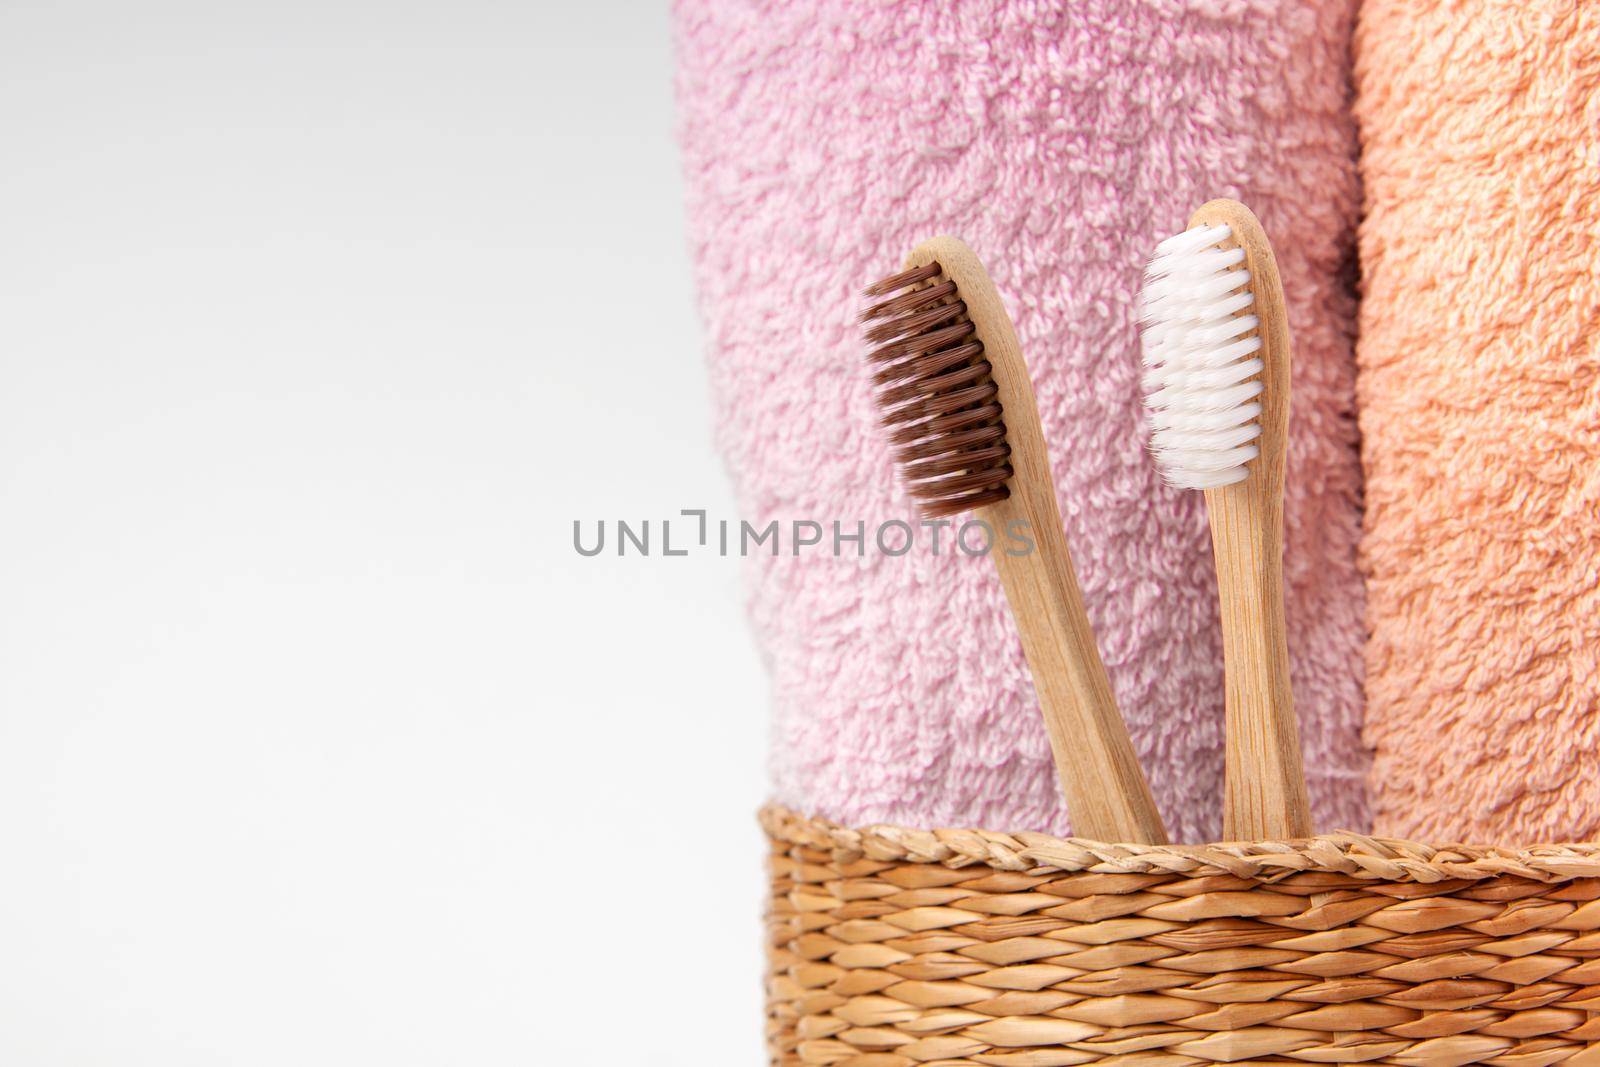 Bamboo toothbrushes with towels in a wicker wooden basket with copy space on white background. Spa, healthy lifestyle and ecology concept.